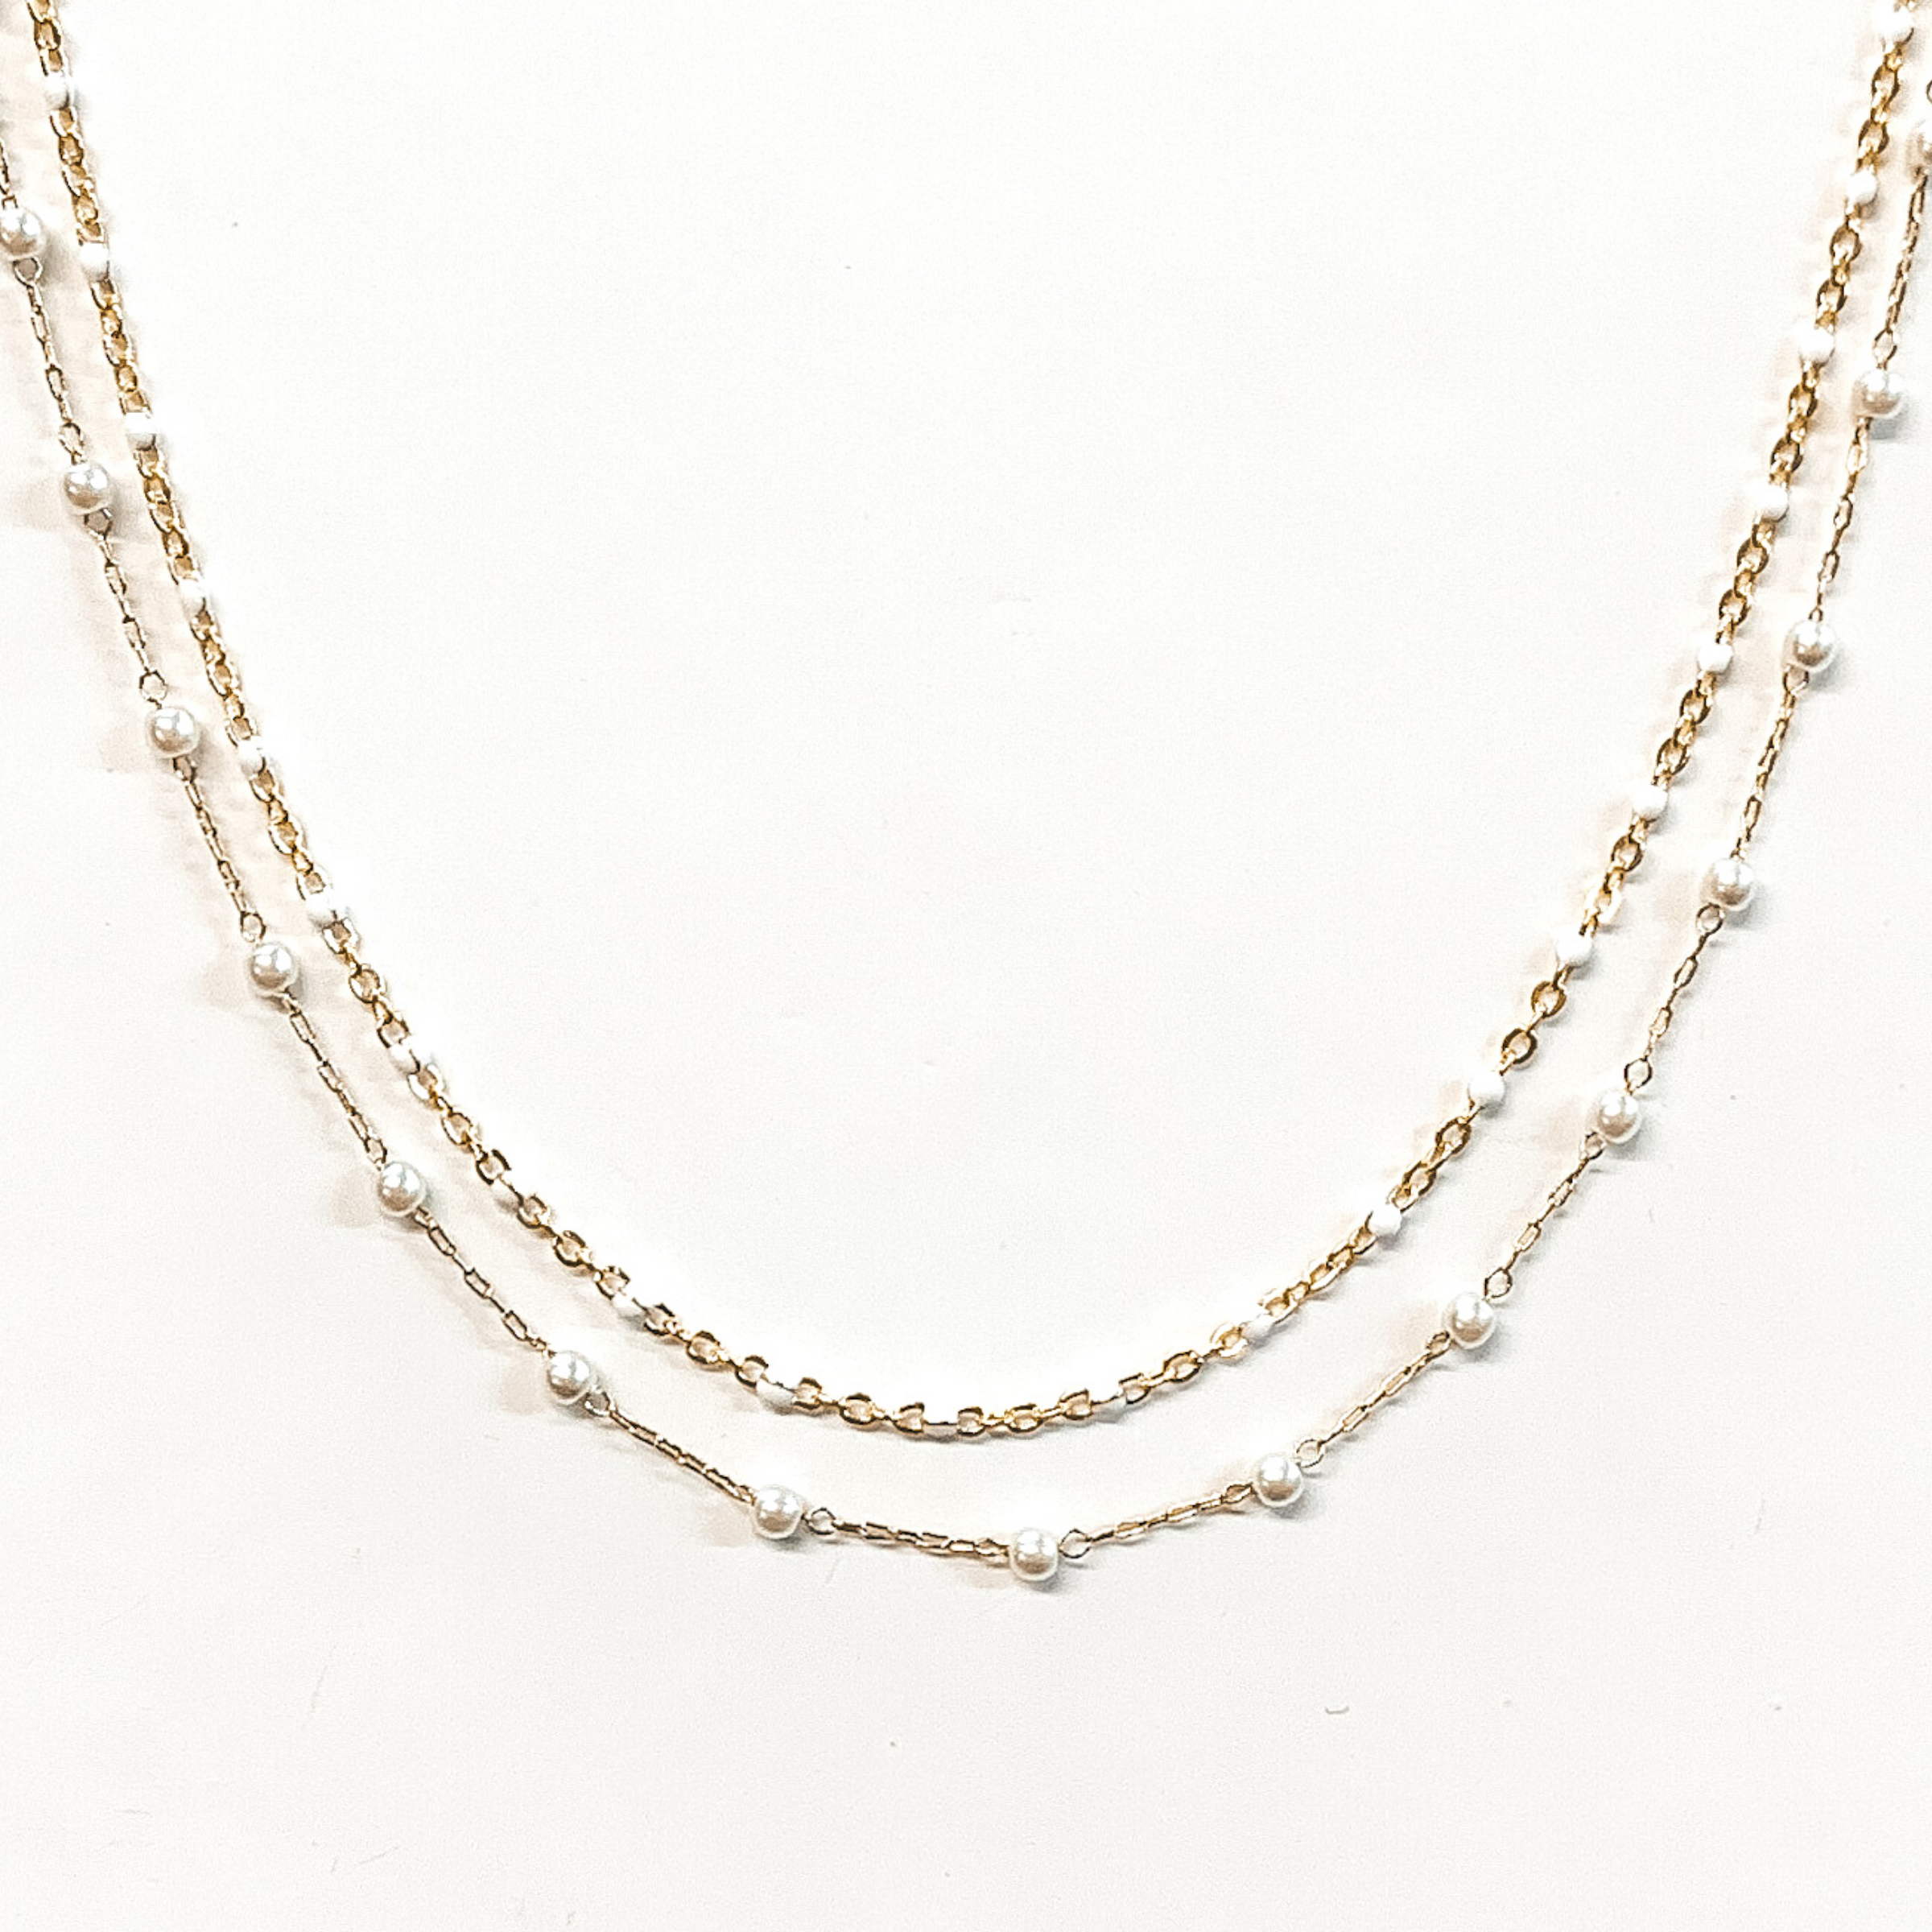 The first strand is a gold chain with small, white bead spacers. The second gold chain has small, white pearl bead spacers. This necklace is pictured on a white background.